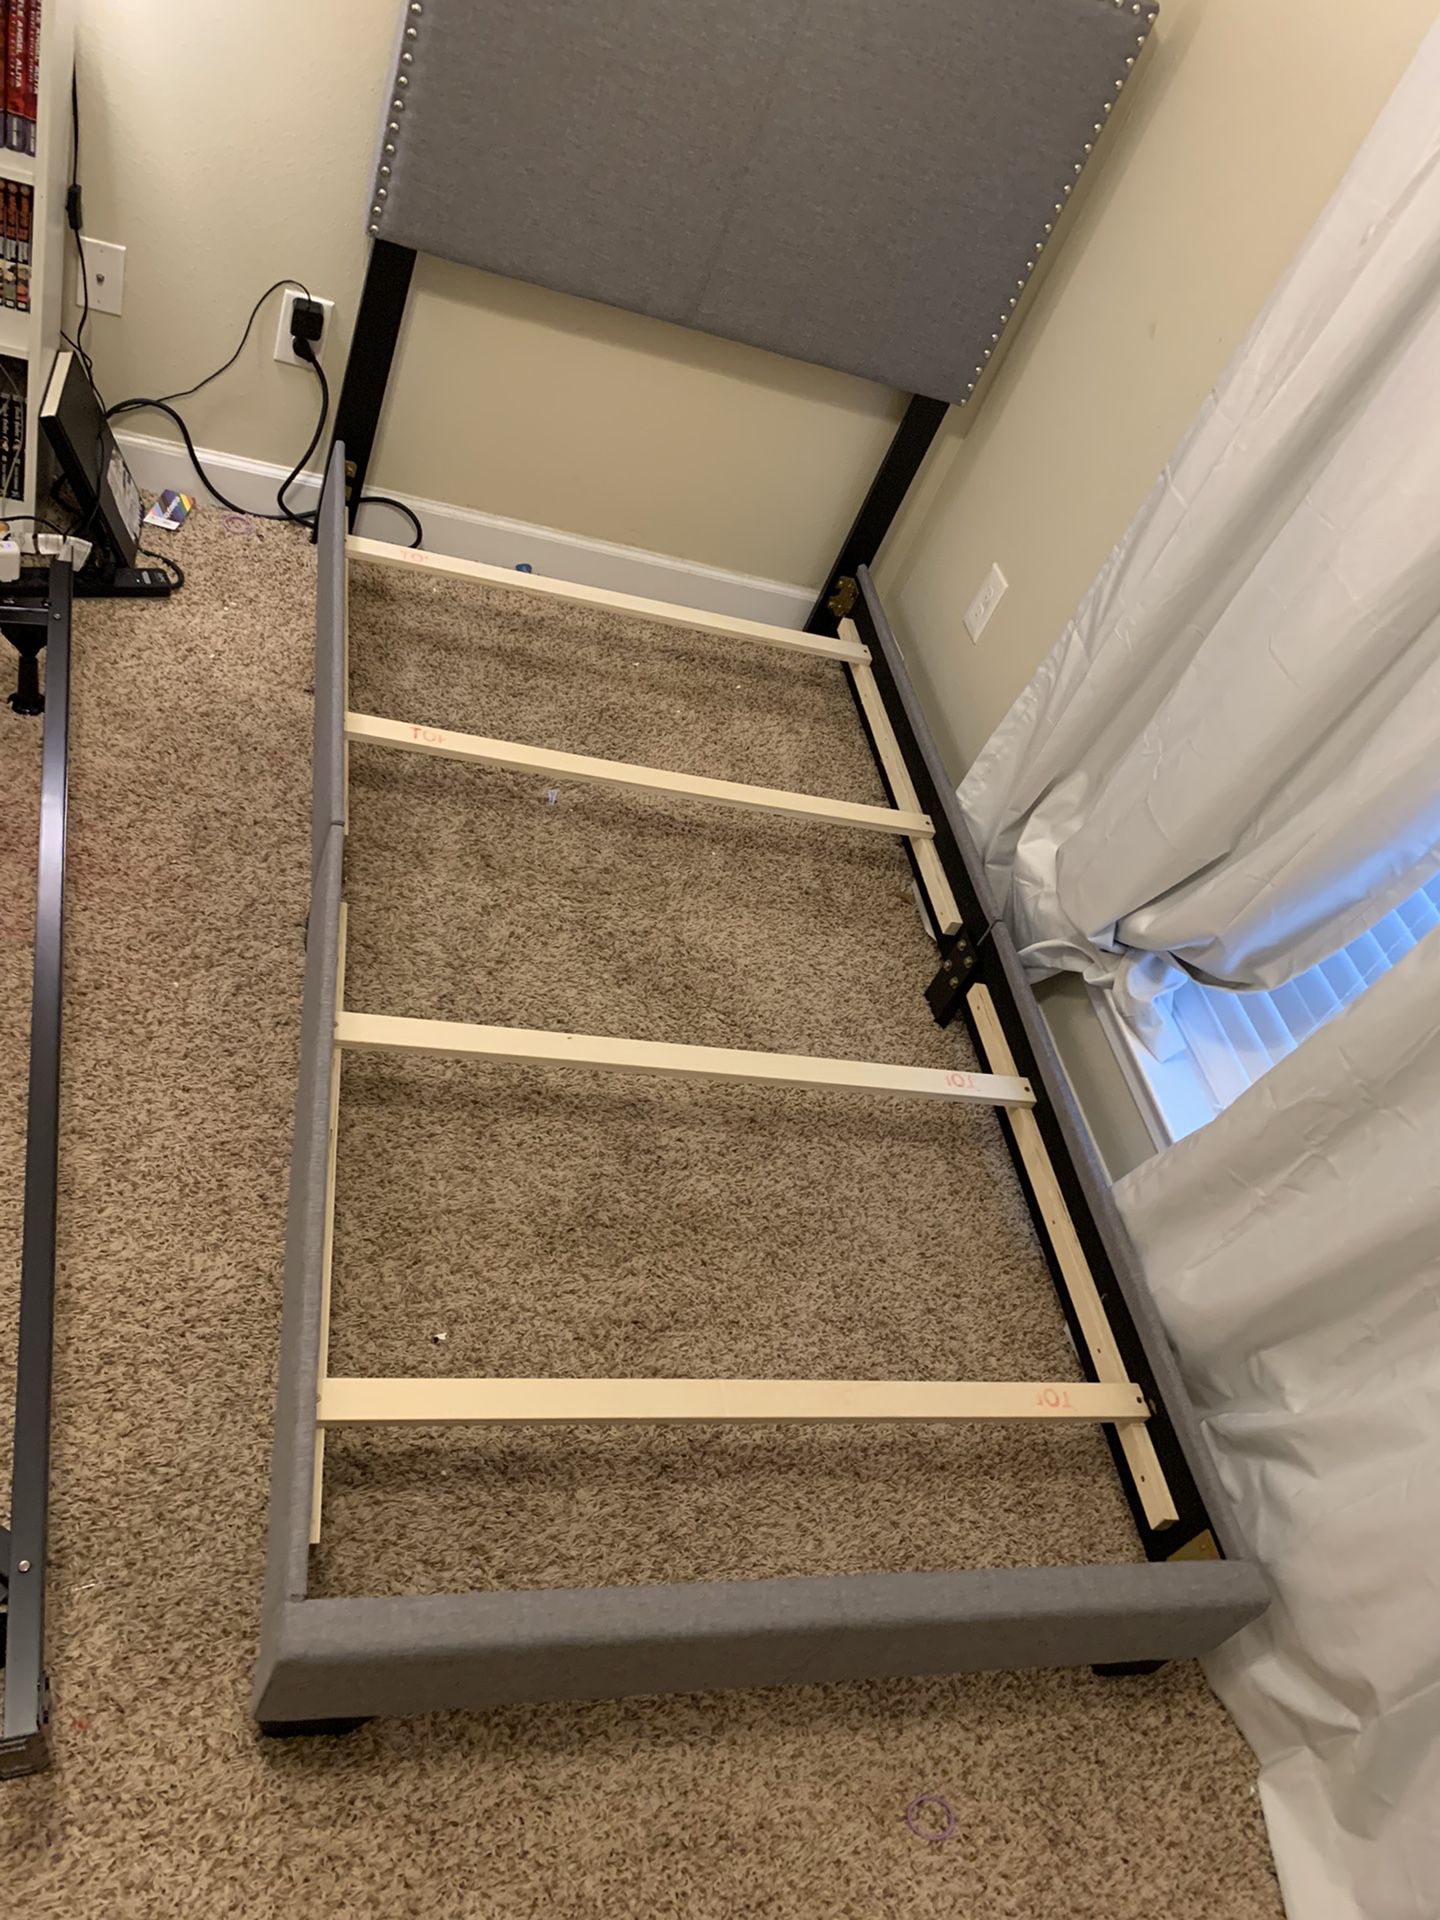 Brand New Twin Size Bed Frame - New In A Box 